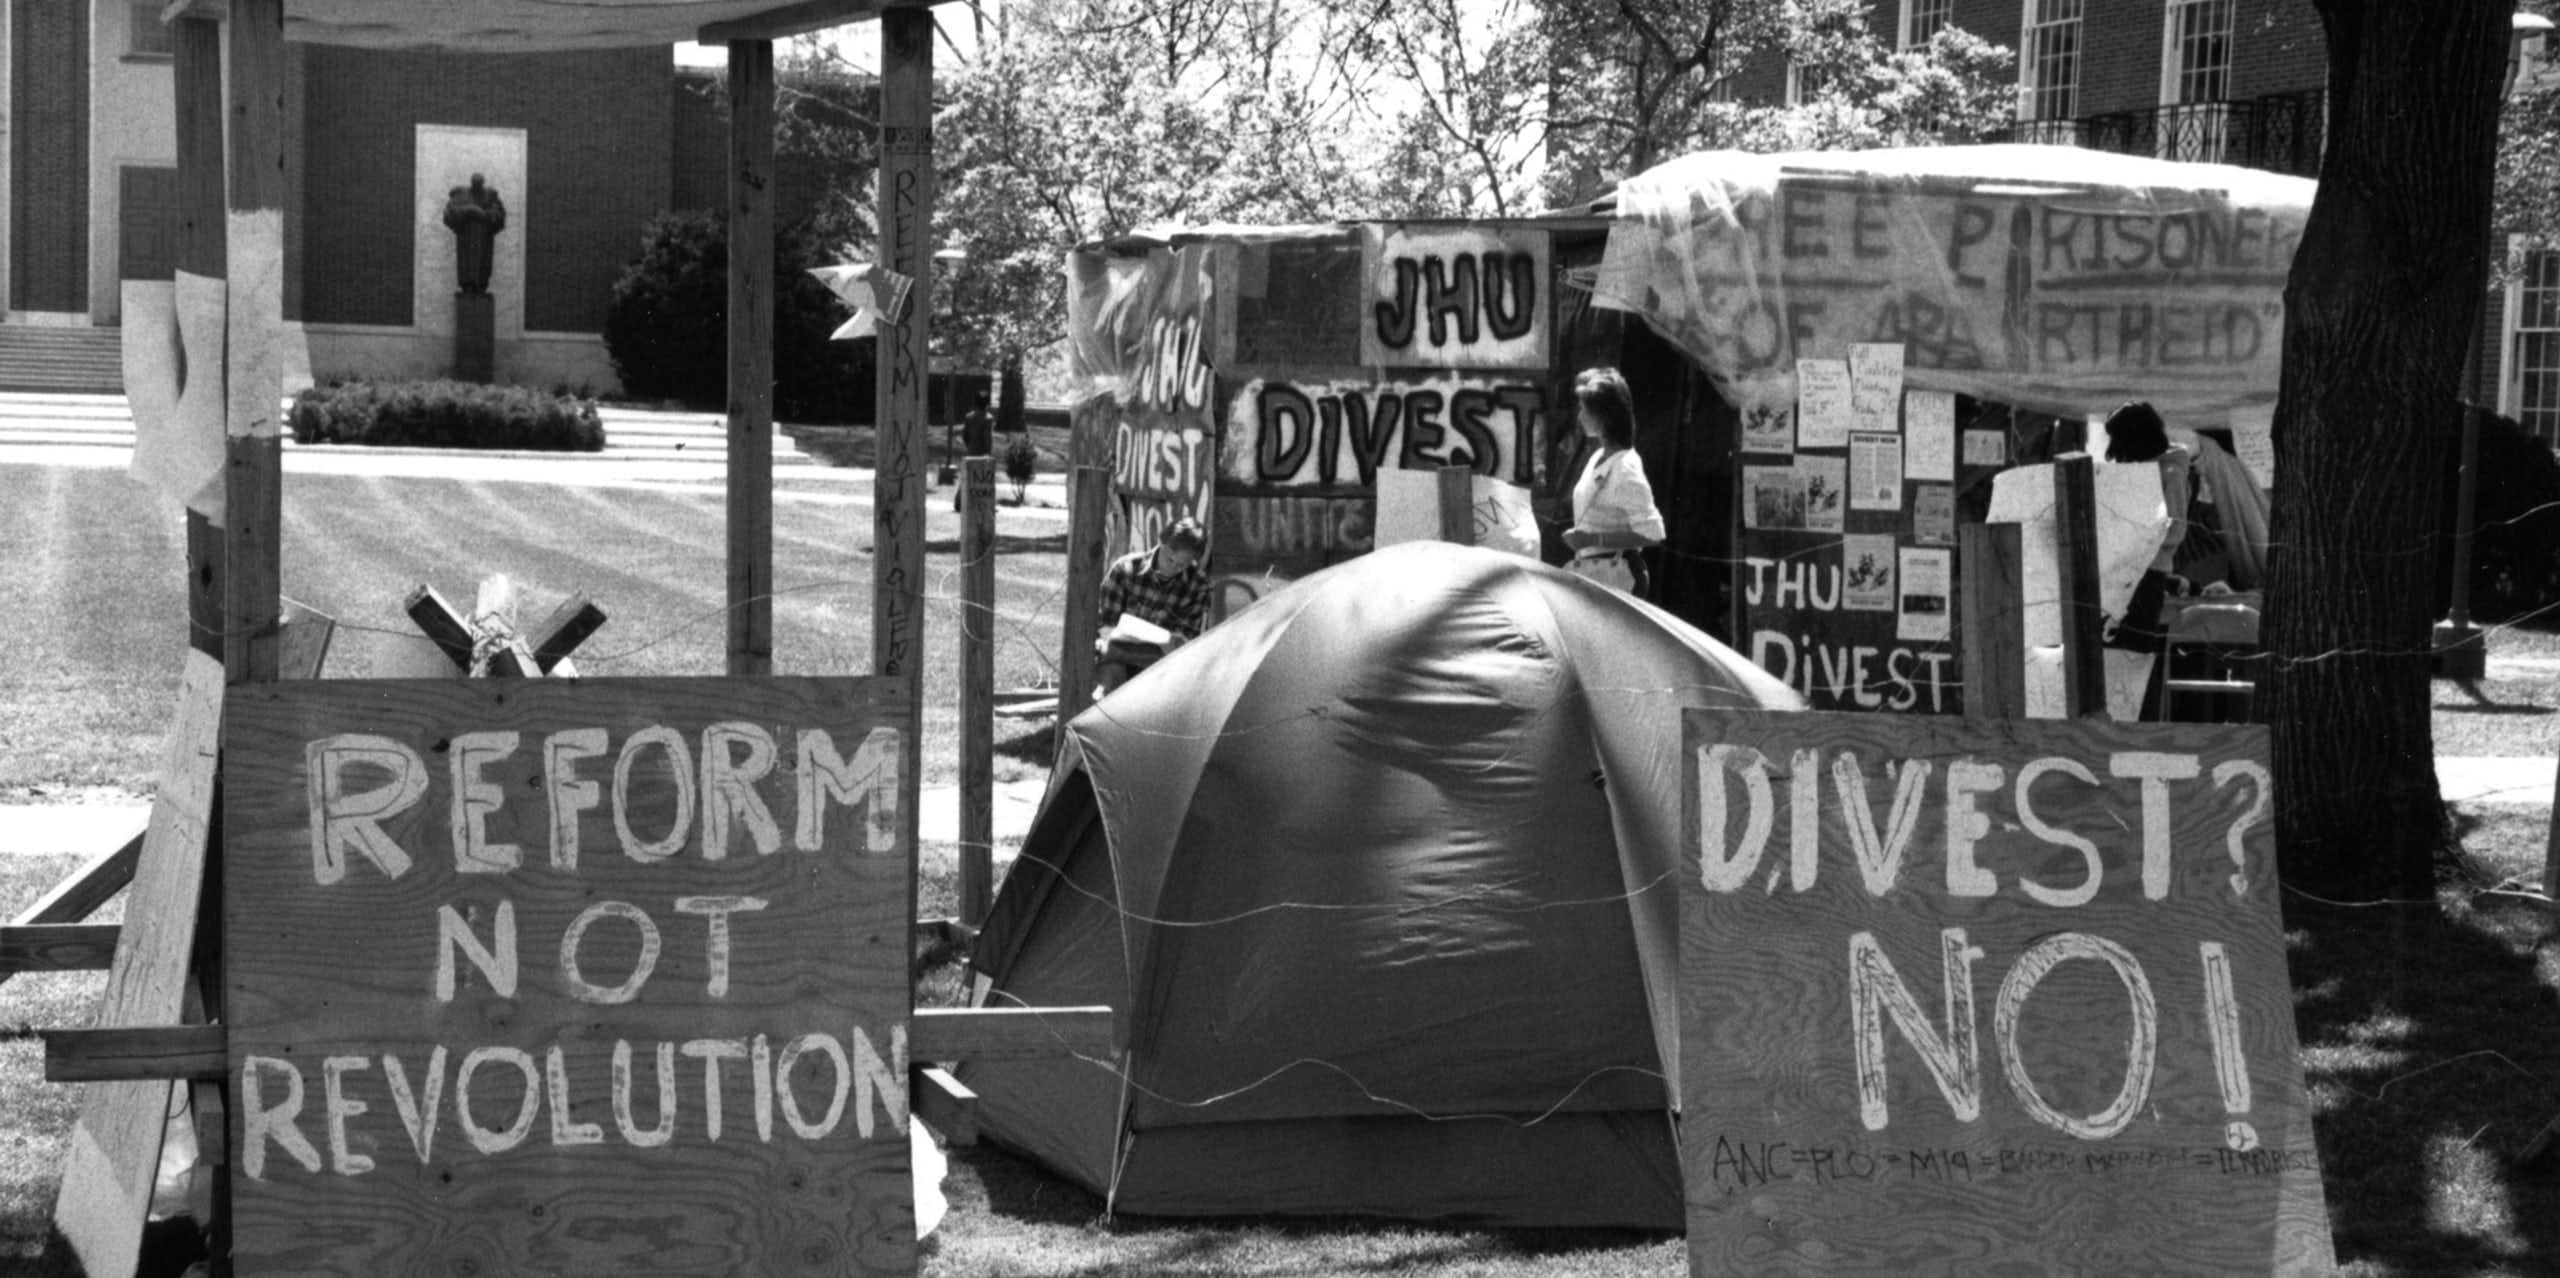 Tents and signs on a university lawn.